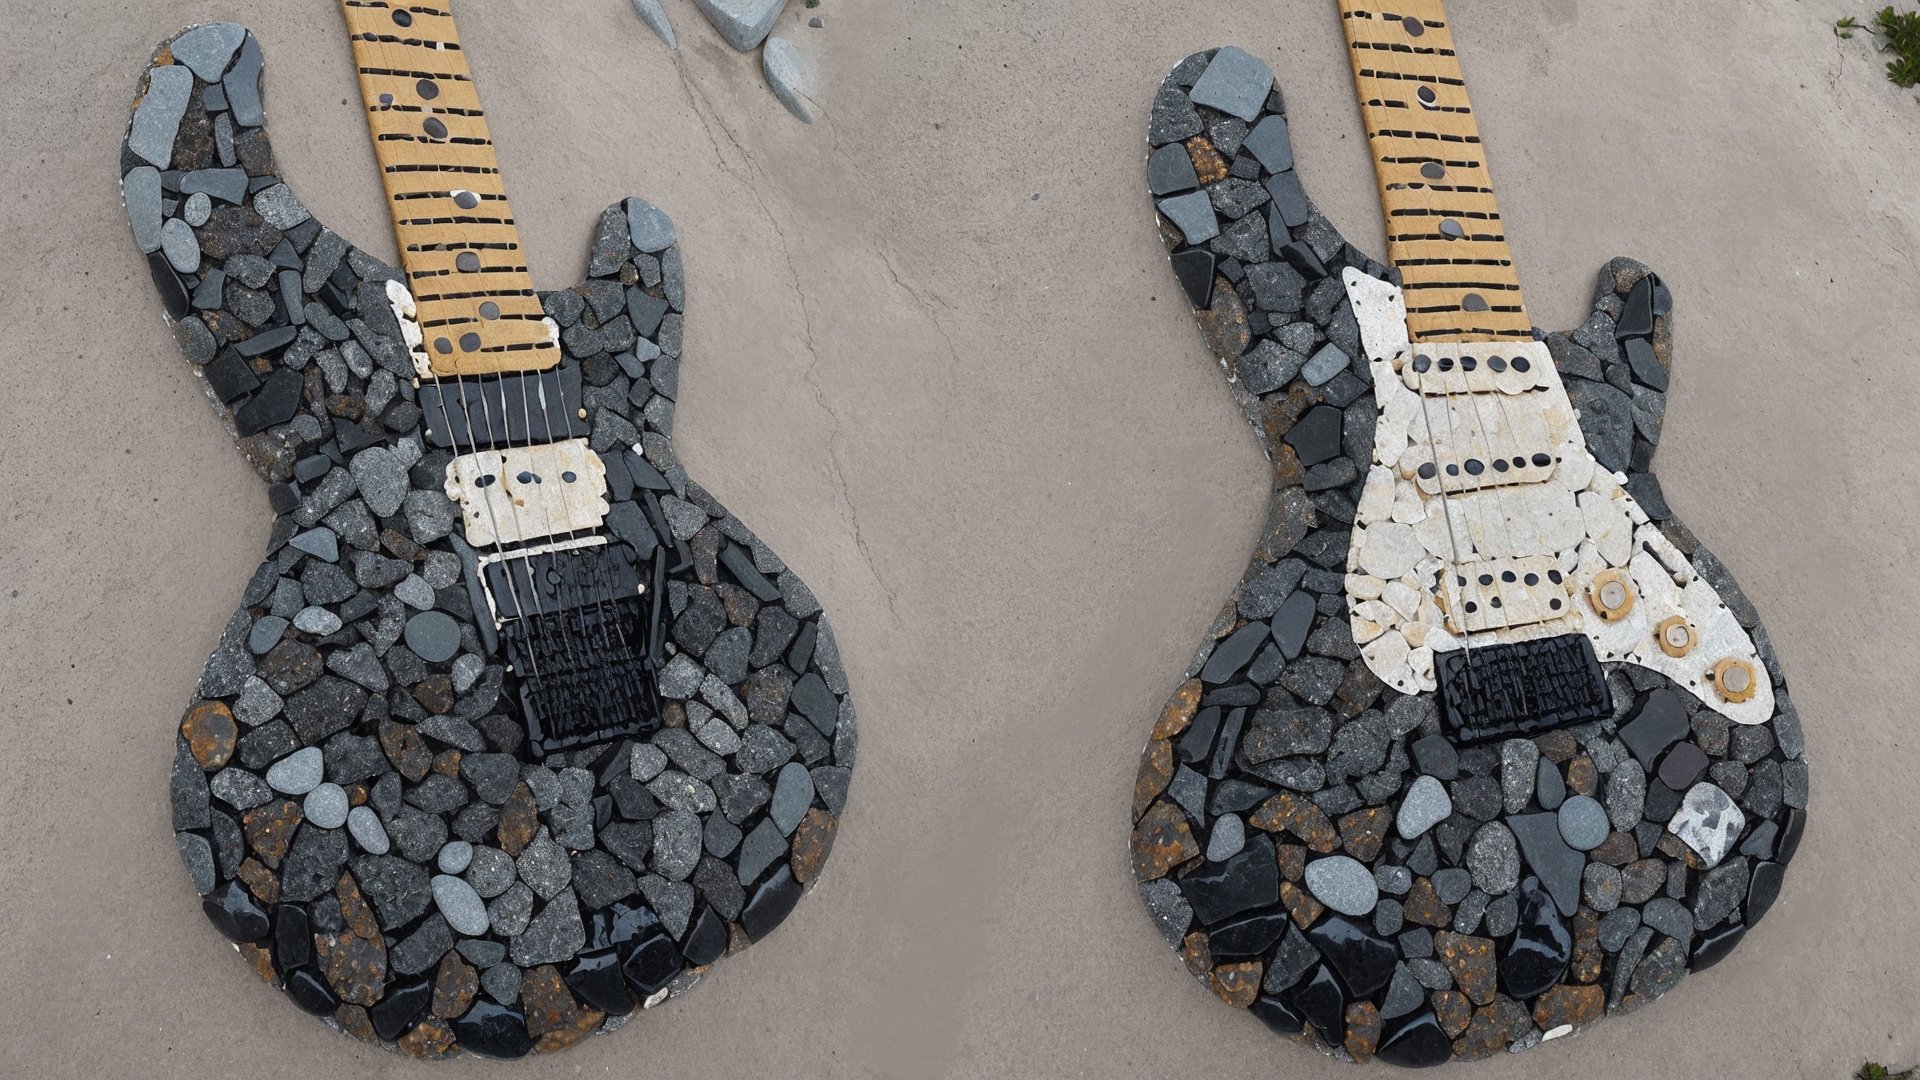 rock_2_img, rock image, rock art, rock, one stone electric guitar shape fully made out of rocks, full view, High detail, rock, best quality, (just a shape, not a guitar you stupid AI)